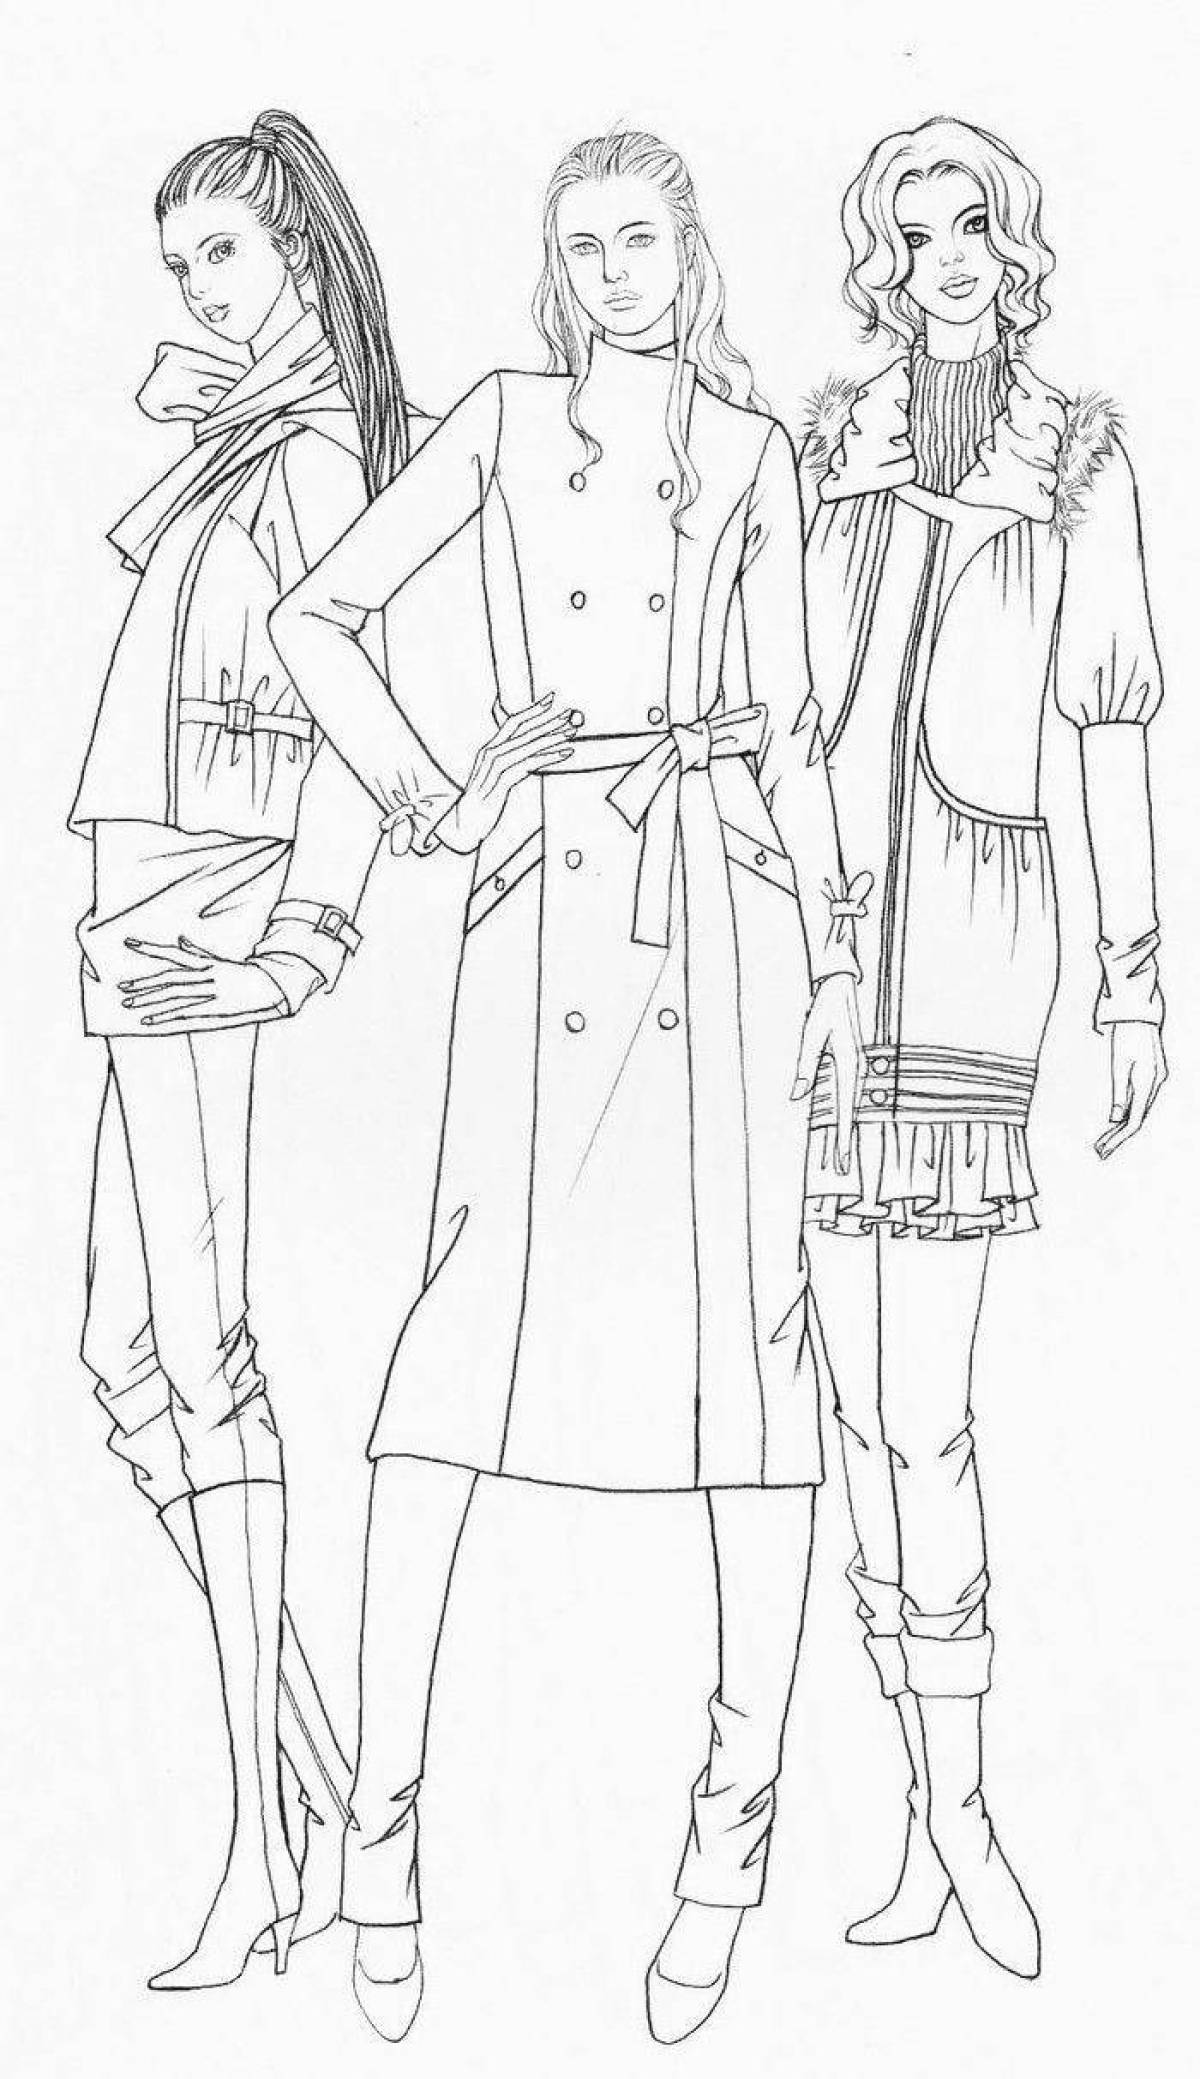 Detail drawing of clothing